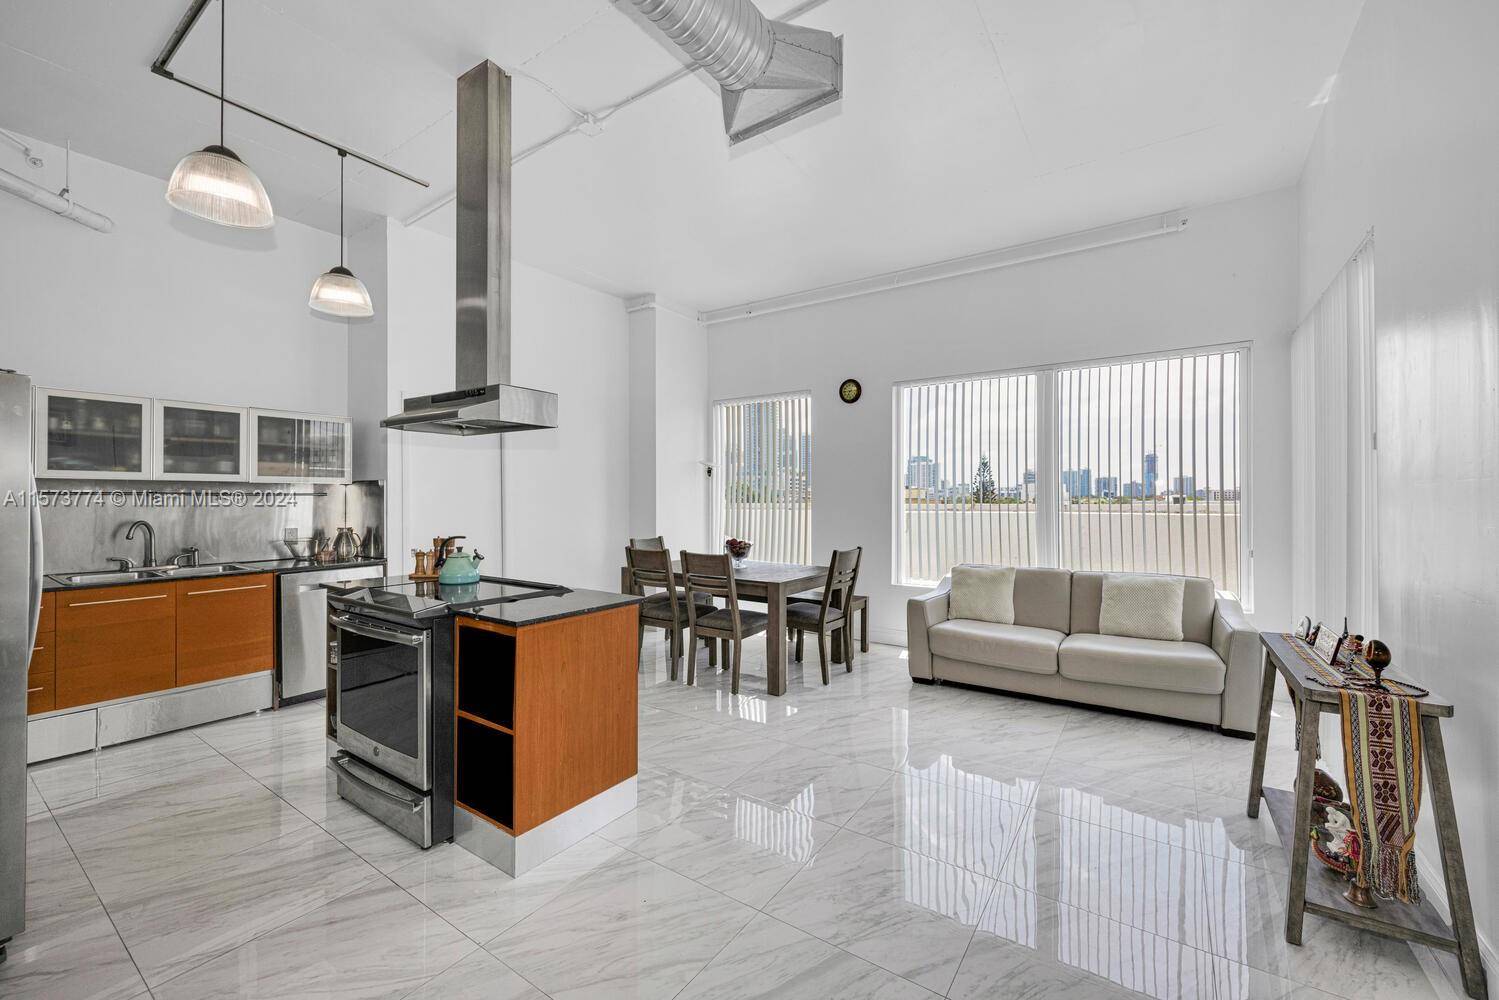 Step inside a 2 bedroom, 2 bathroom condo nestled along the intercoastal to discover a meticulously updated space featuring sleek stainless steel appliances, fully tiled bathrooms, and the convenience of ...